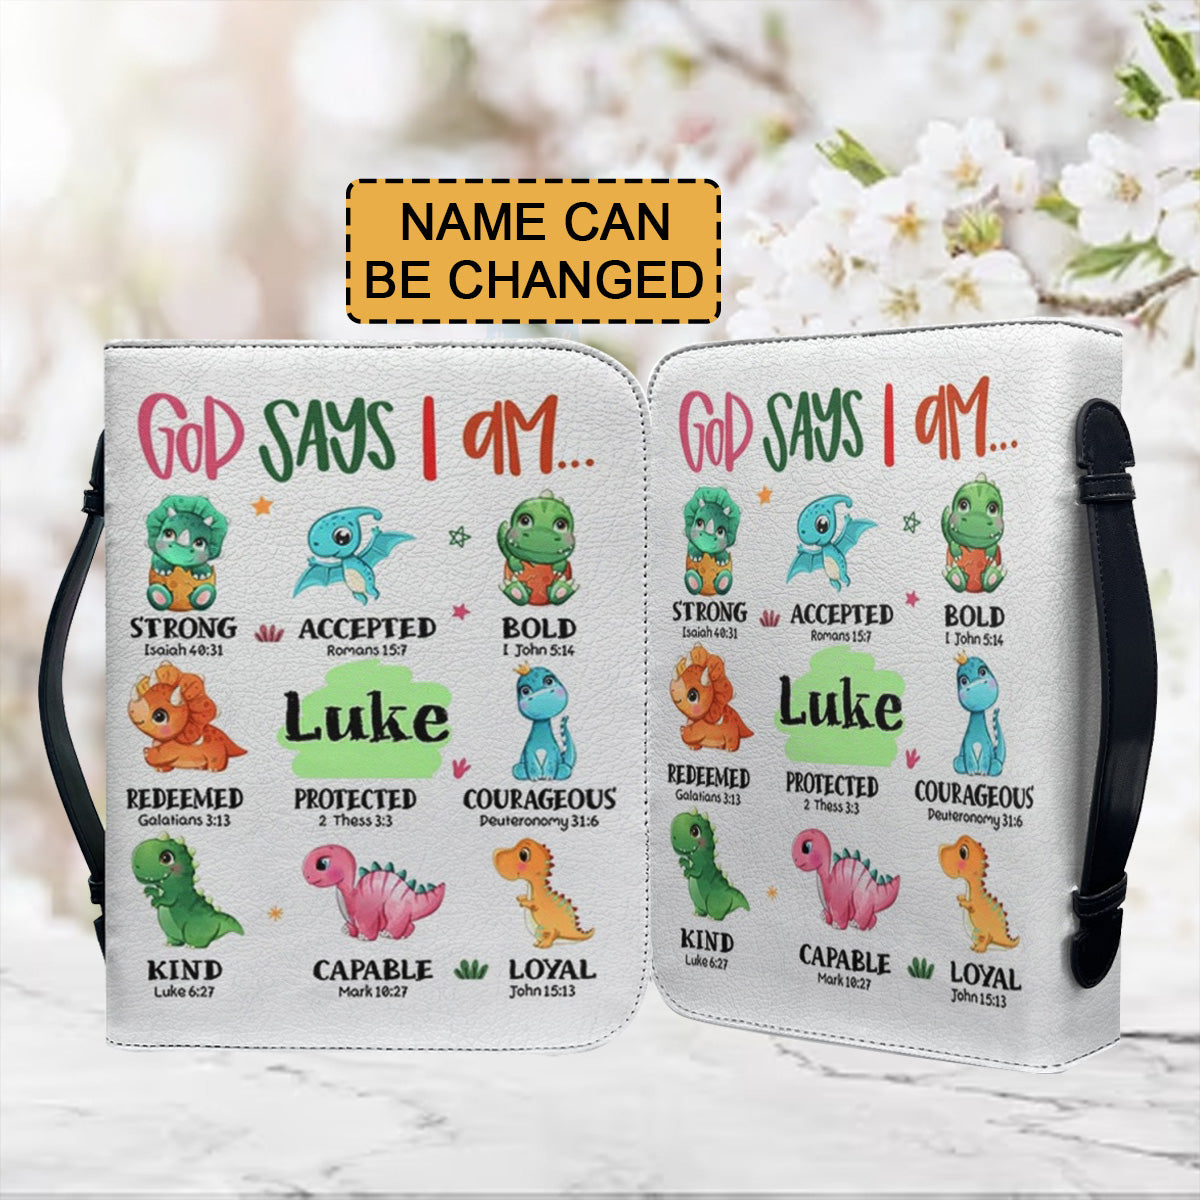 Christianartbag Bible Cover, God Says I Am Bible Cover, Personalized Bible Cover, Cute Dinosaur Bible Cover, Bible Cover For Kids, Christian Gifts, CAB03281123. - Christian Art Bag